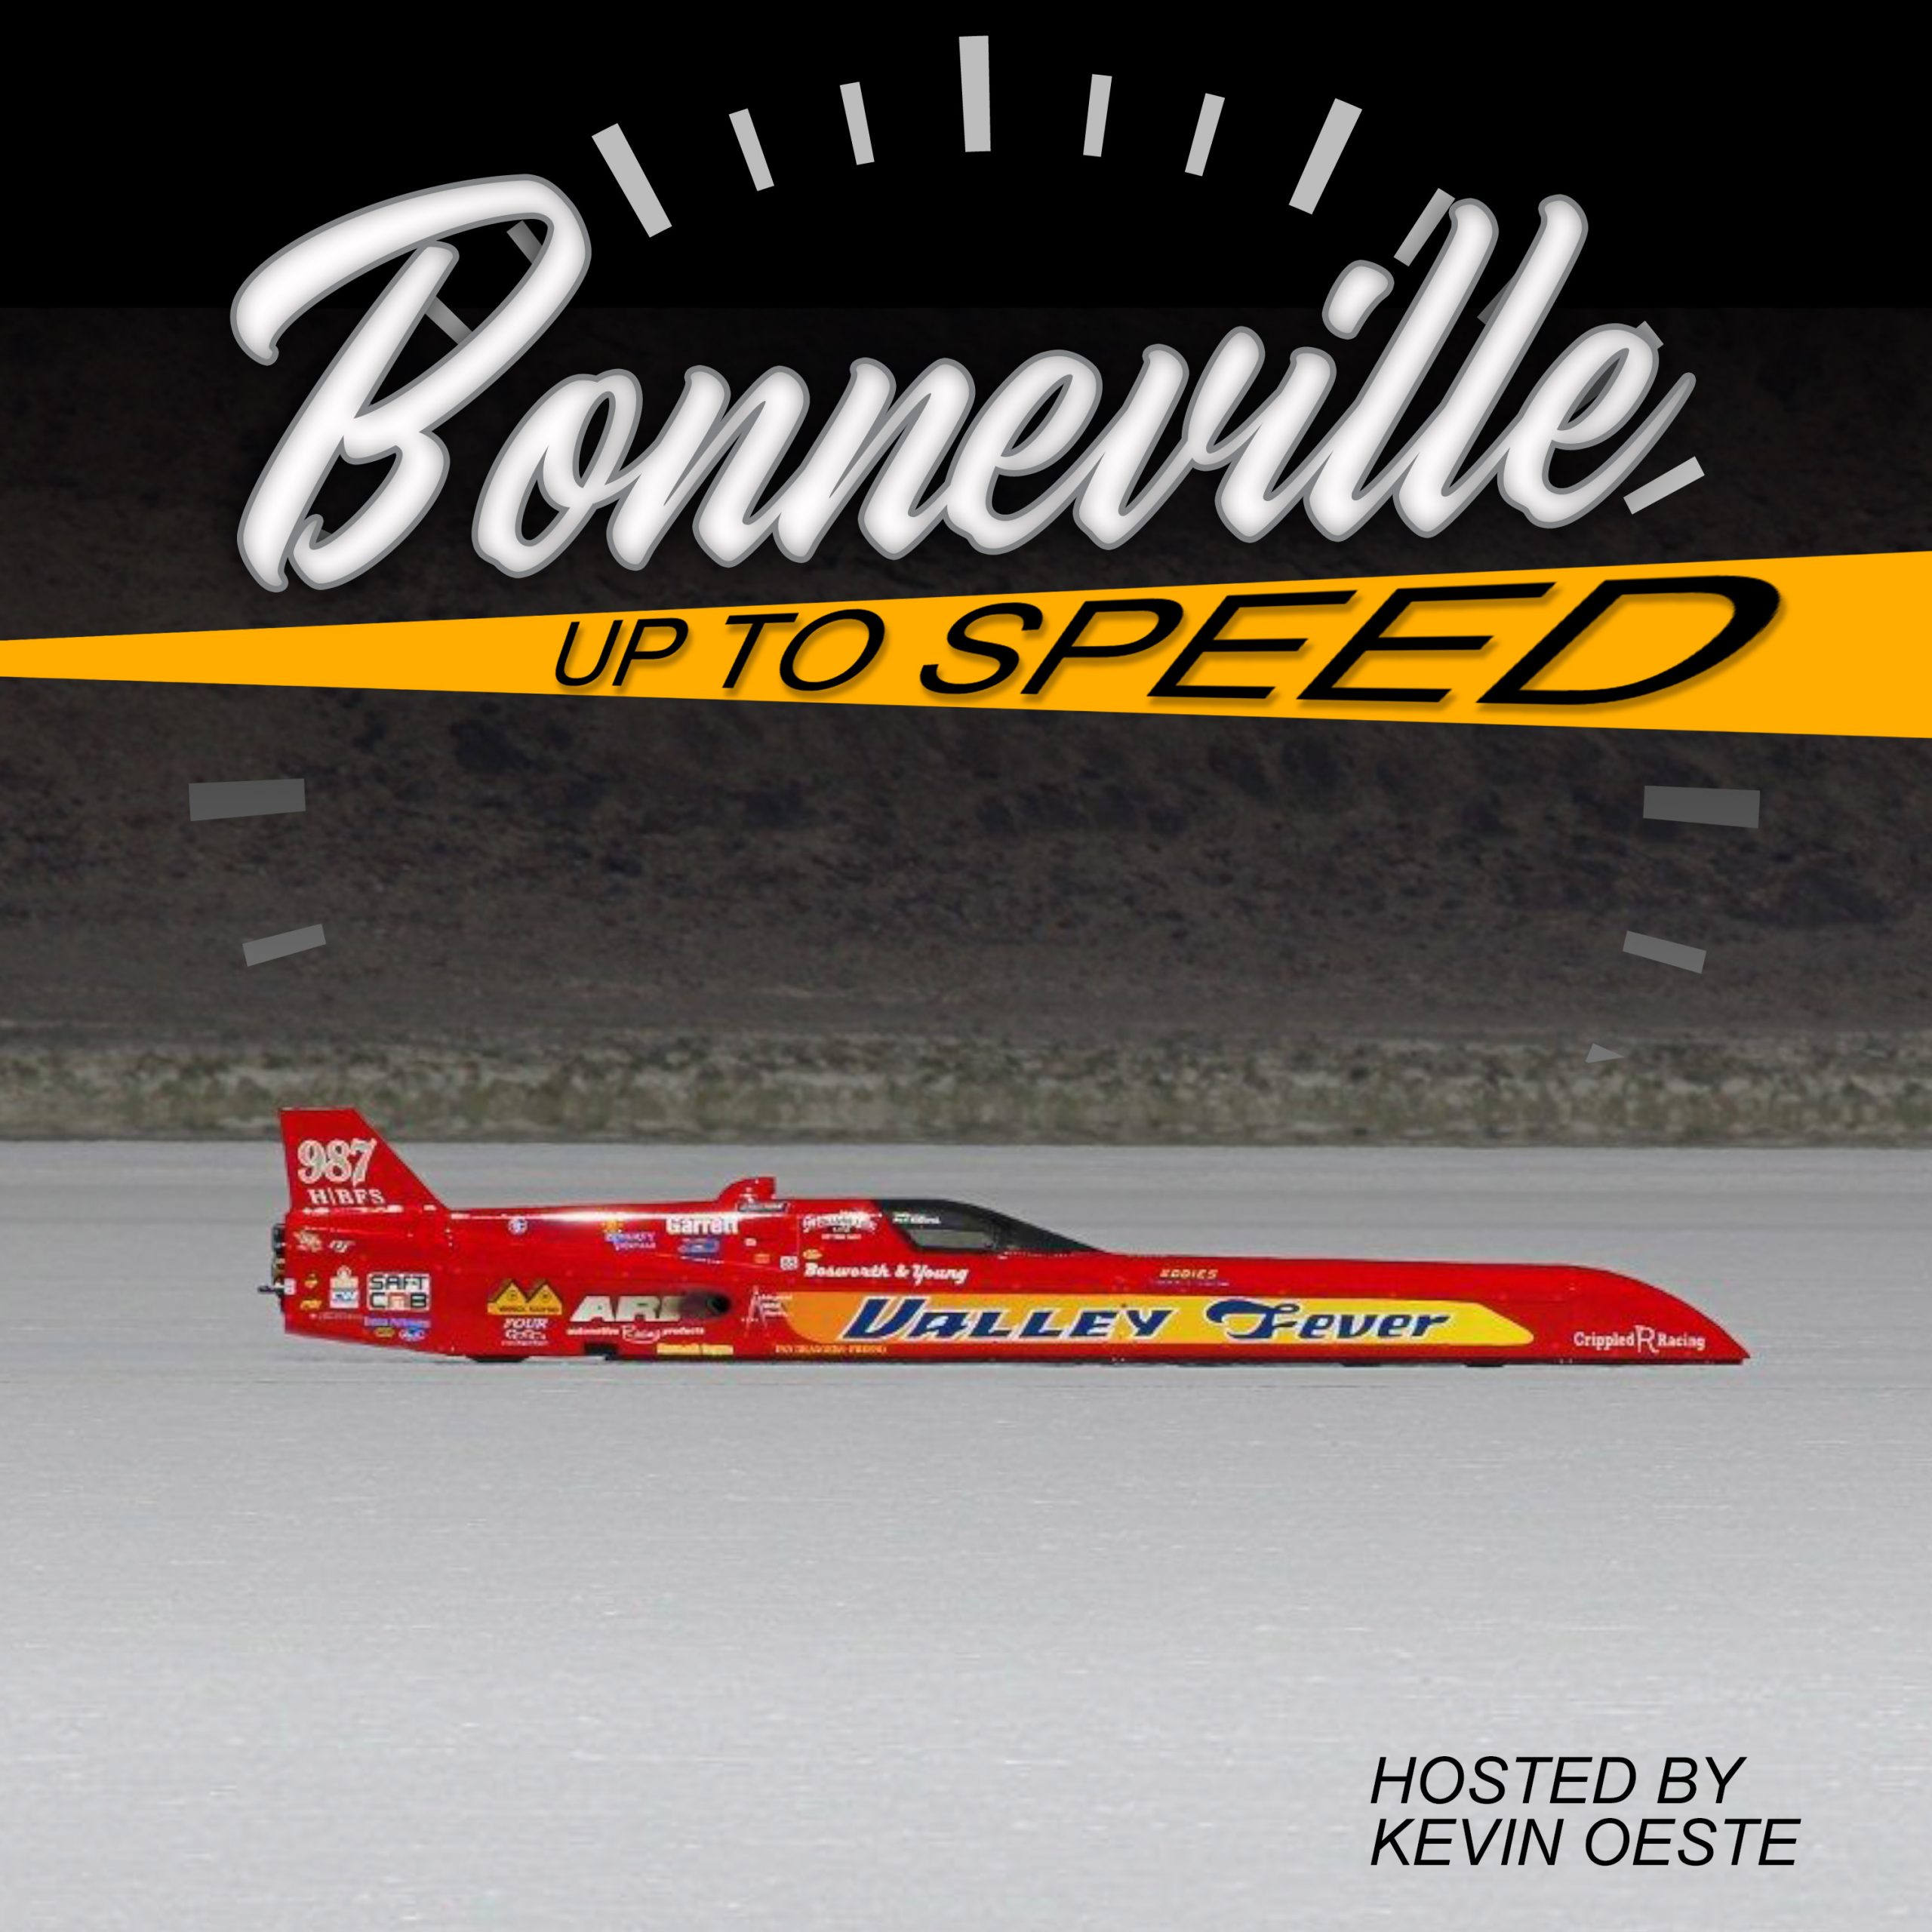 Home Built Land Speed Racer Brad Bosworth and the Valley Fever Streamliner on the Bonneville Up To Speed Podcast